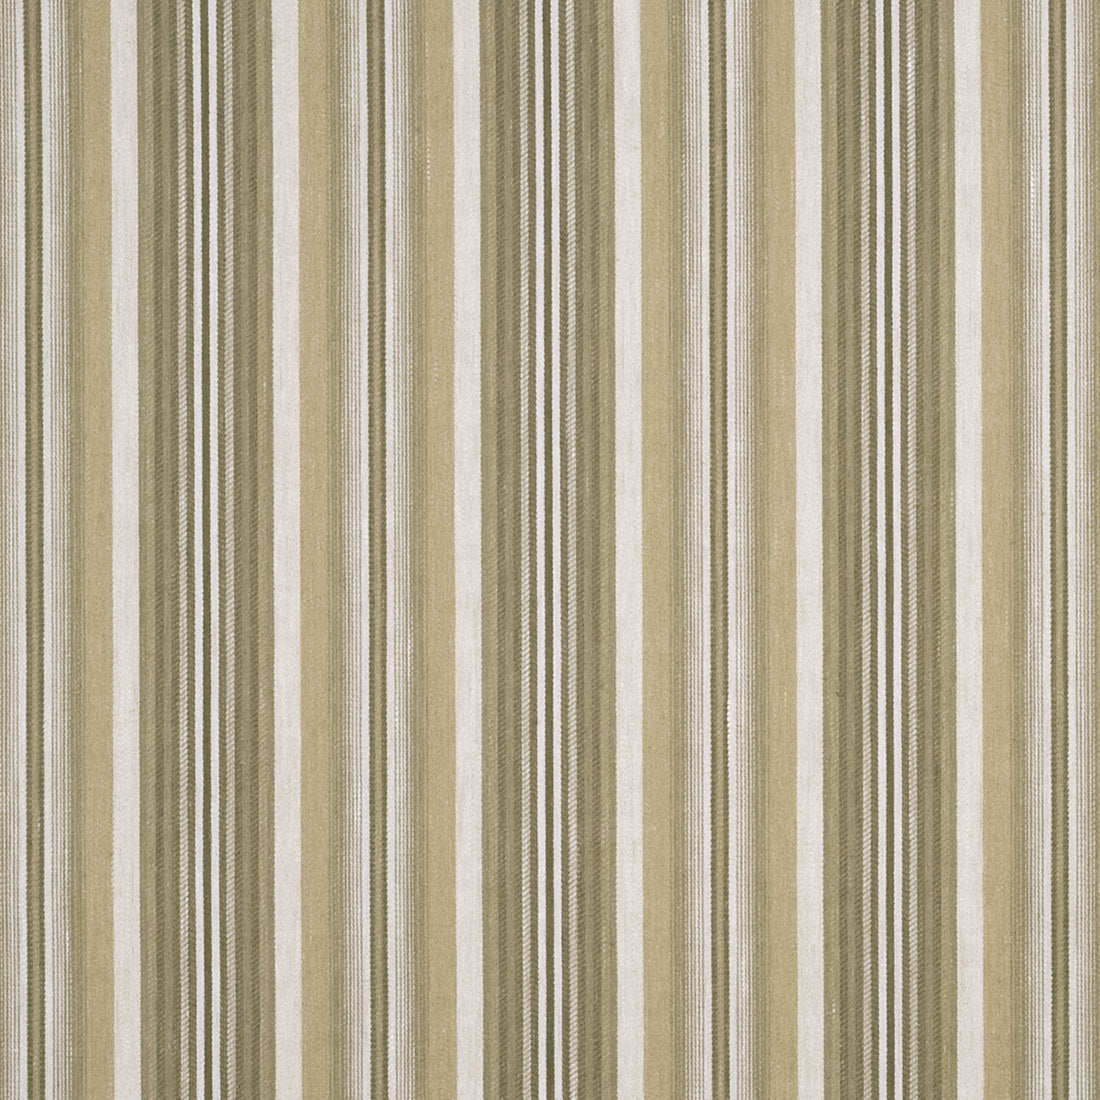 Melora Stripe fabric in linen color - pattern BF10322.110.0 - by G P &amp; J Baker in the Lismore Weaves collection